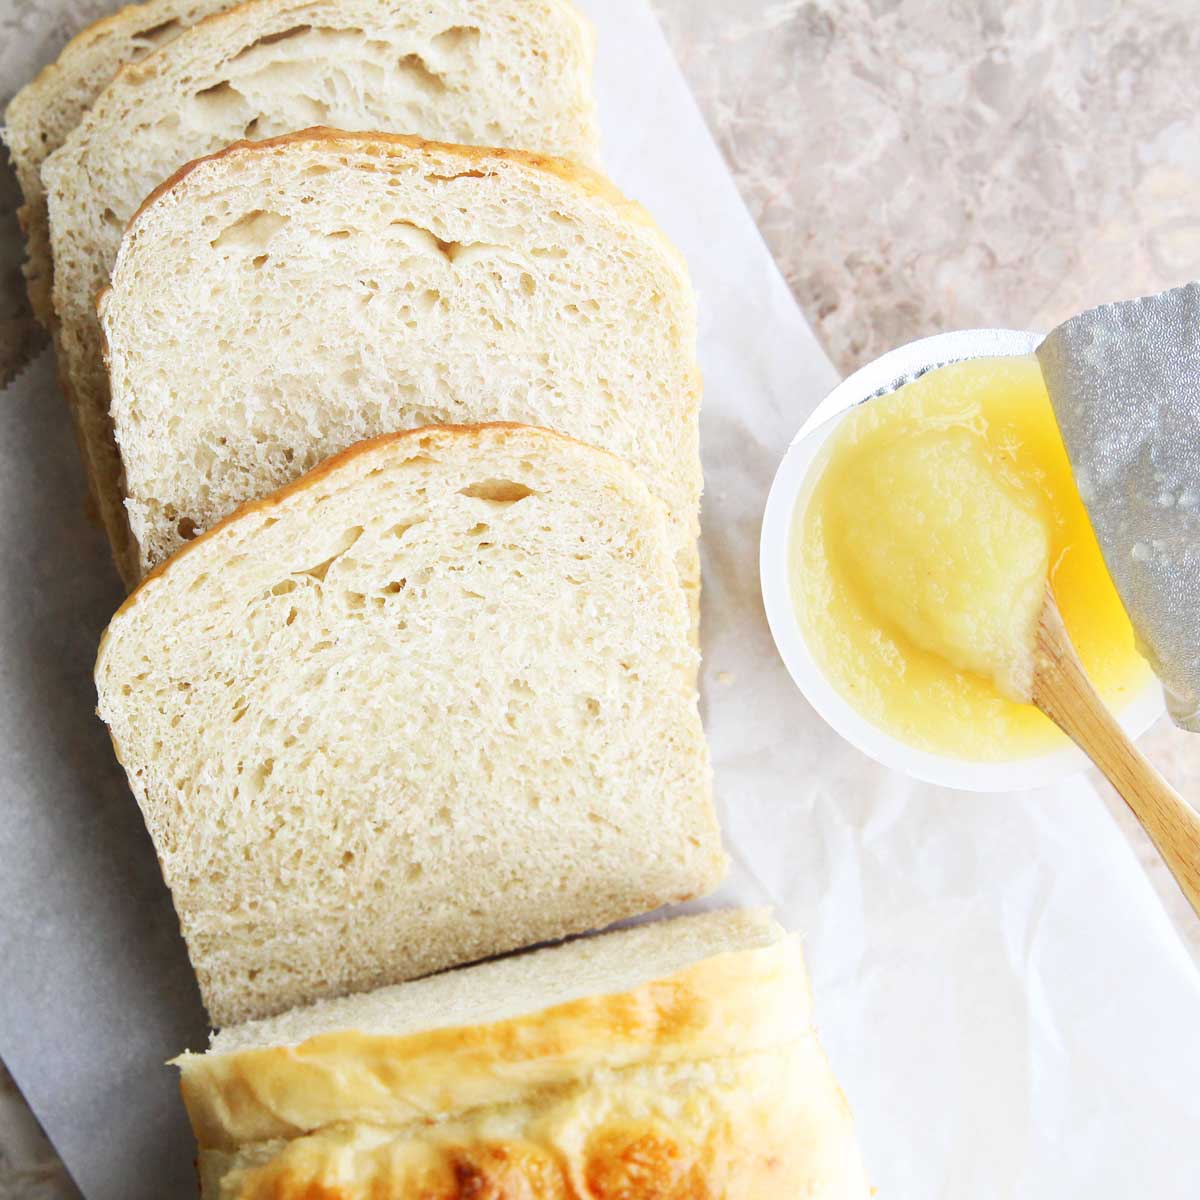 10 HEALTHY & VEGAN YEAST BREAD RECIPES MADE WITH FRUITS AND VEGGIES - yeast bread